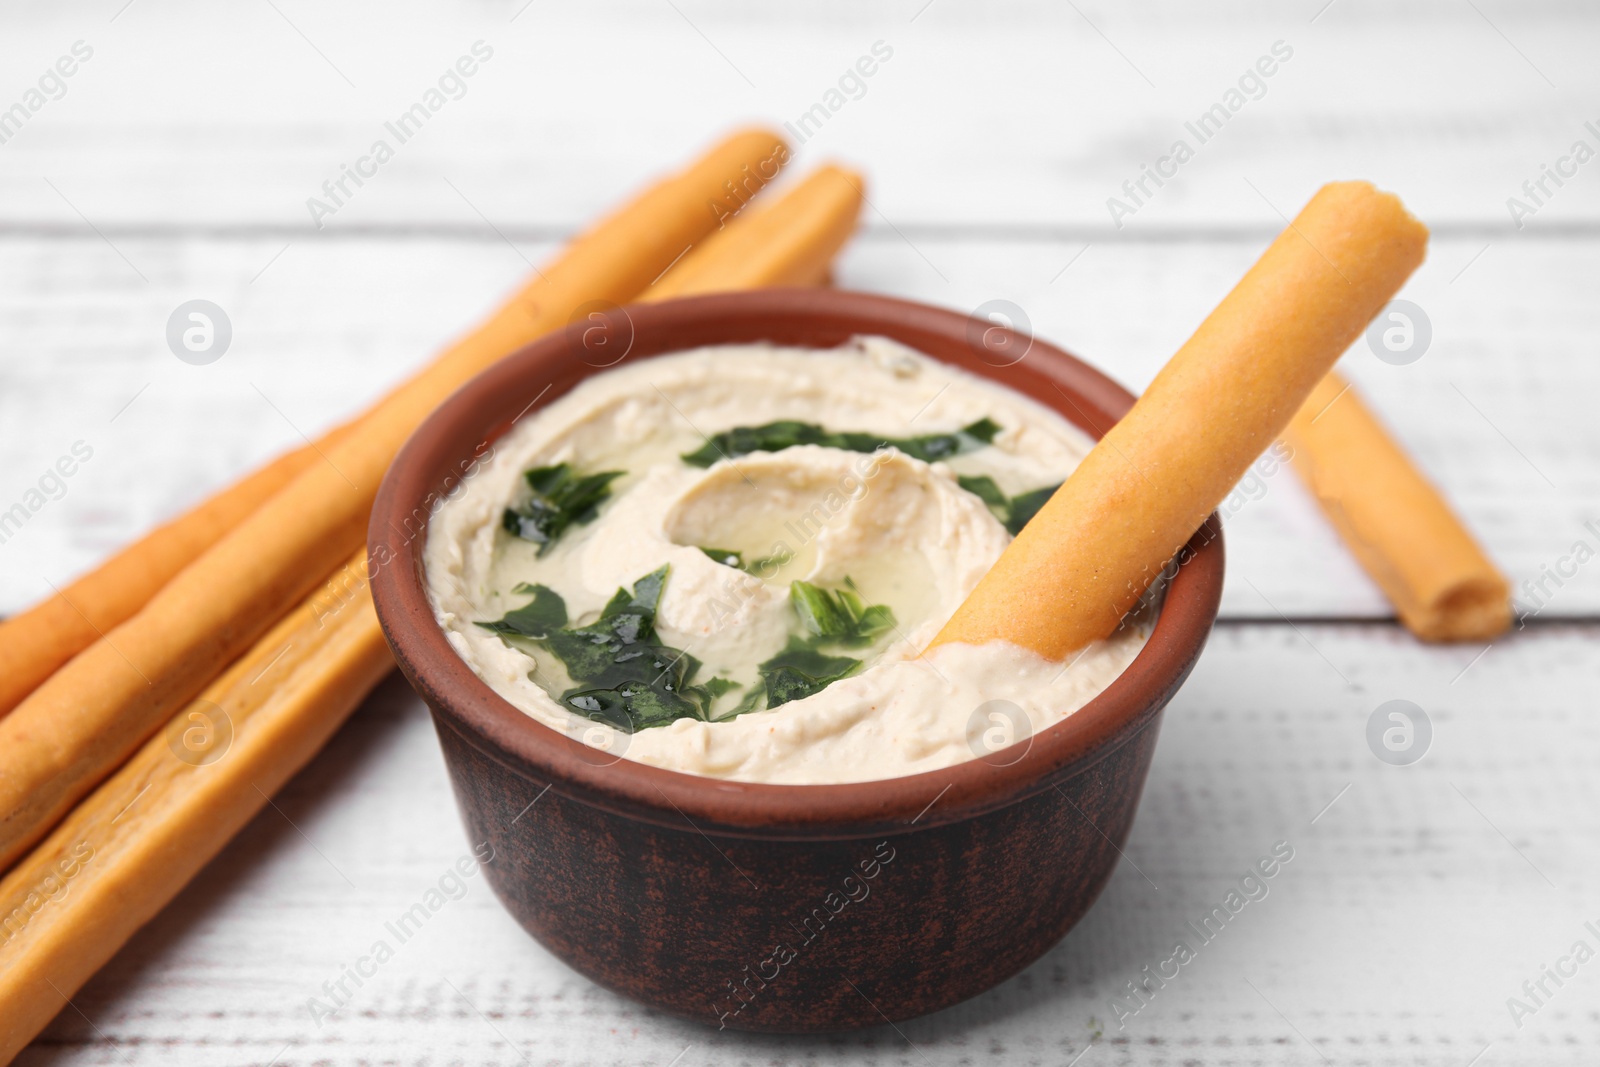 Photo of Delicious hummus with grissini sticks on white wooden table